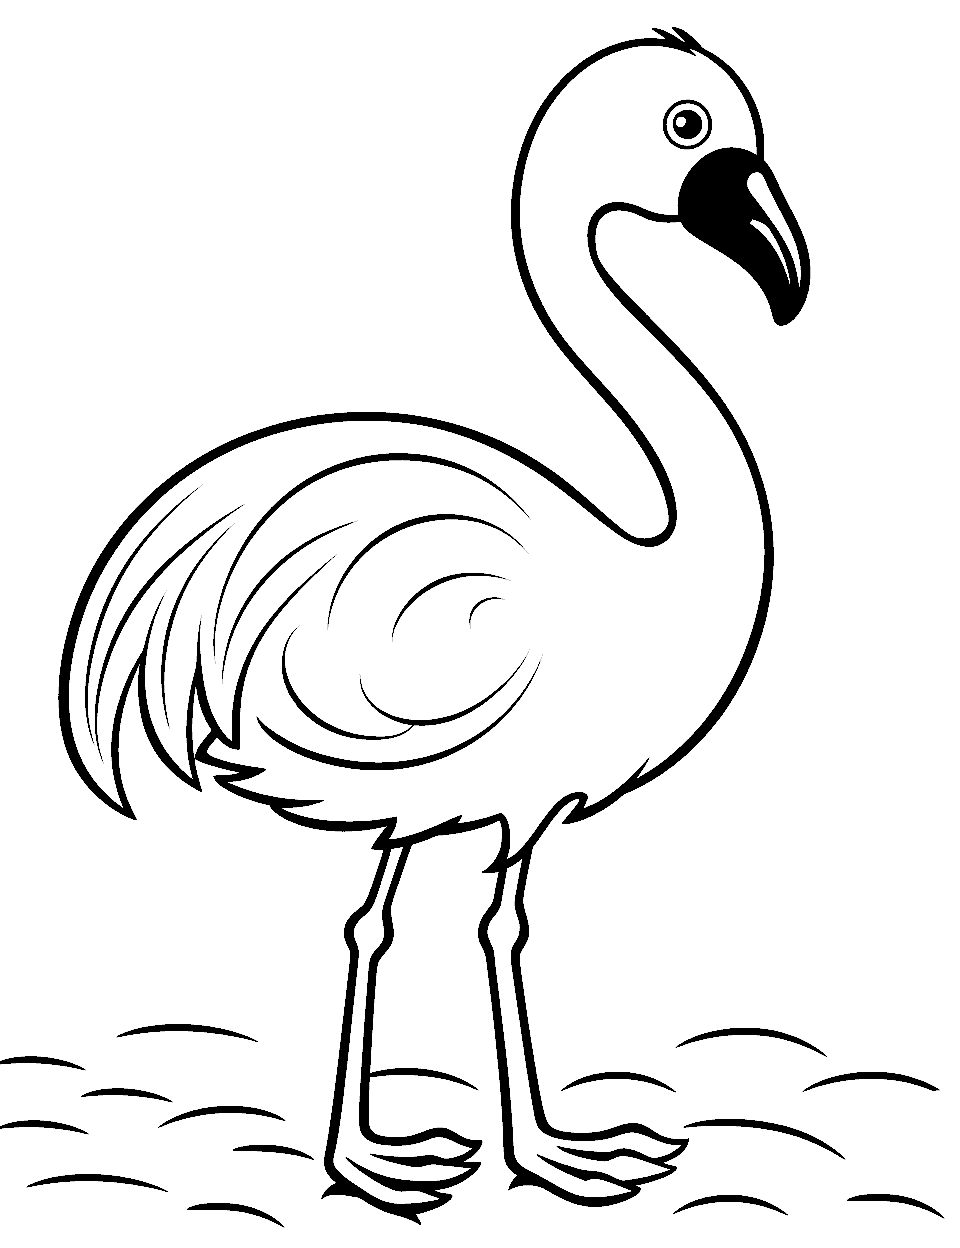 Kawaii Flamingo in a Cute Pose Coloring Page - A super cute, kawaii-style flamingo with big, expressive eyes and a cheerful pose.